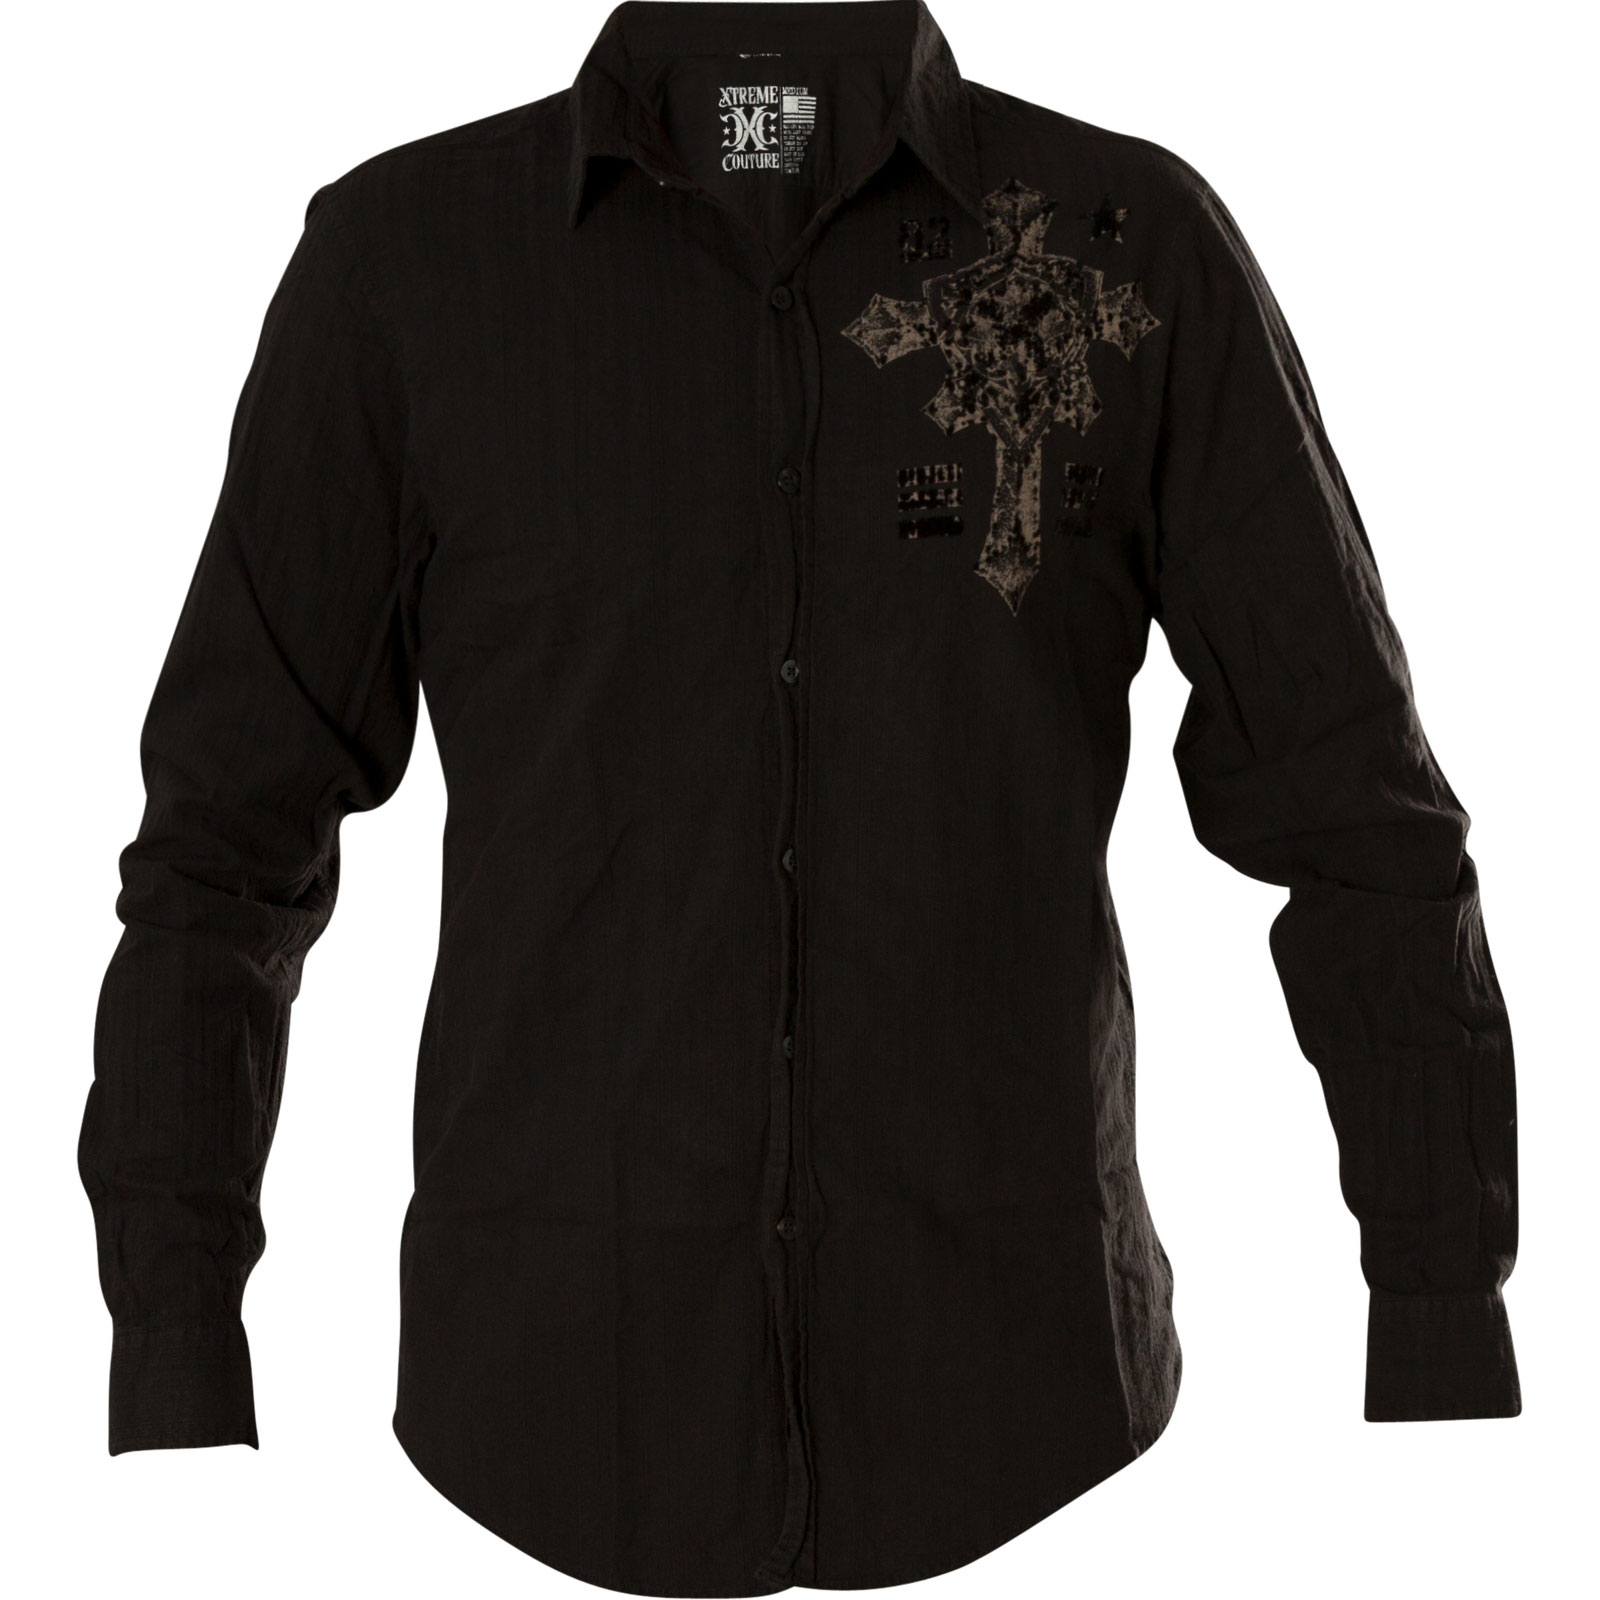 Xtreme Couture by Affliction Shirt Royalty Cross Rev with a large cross